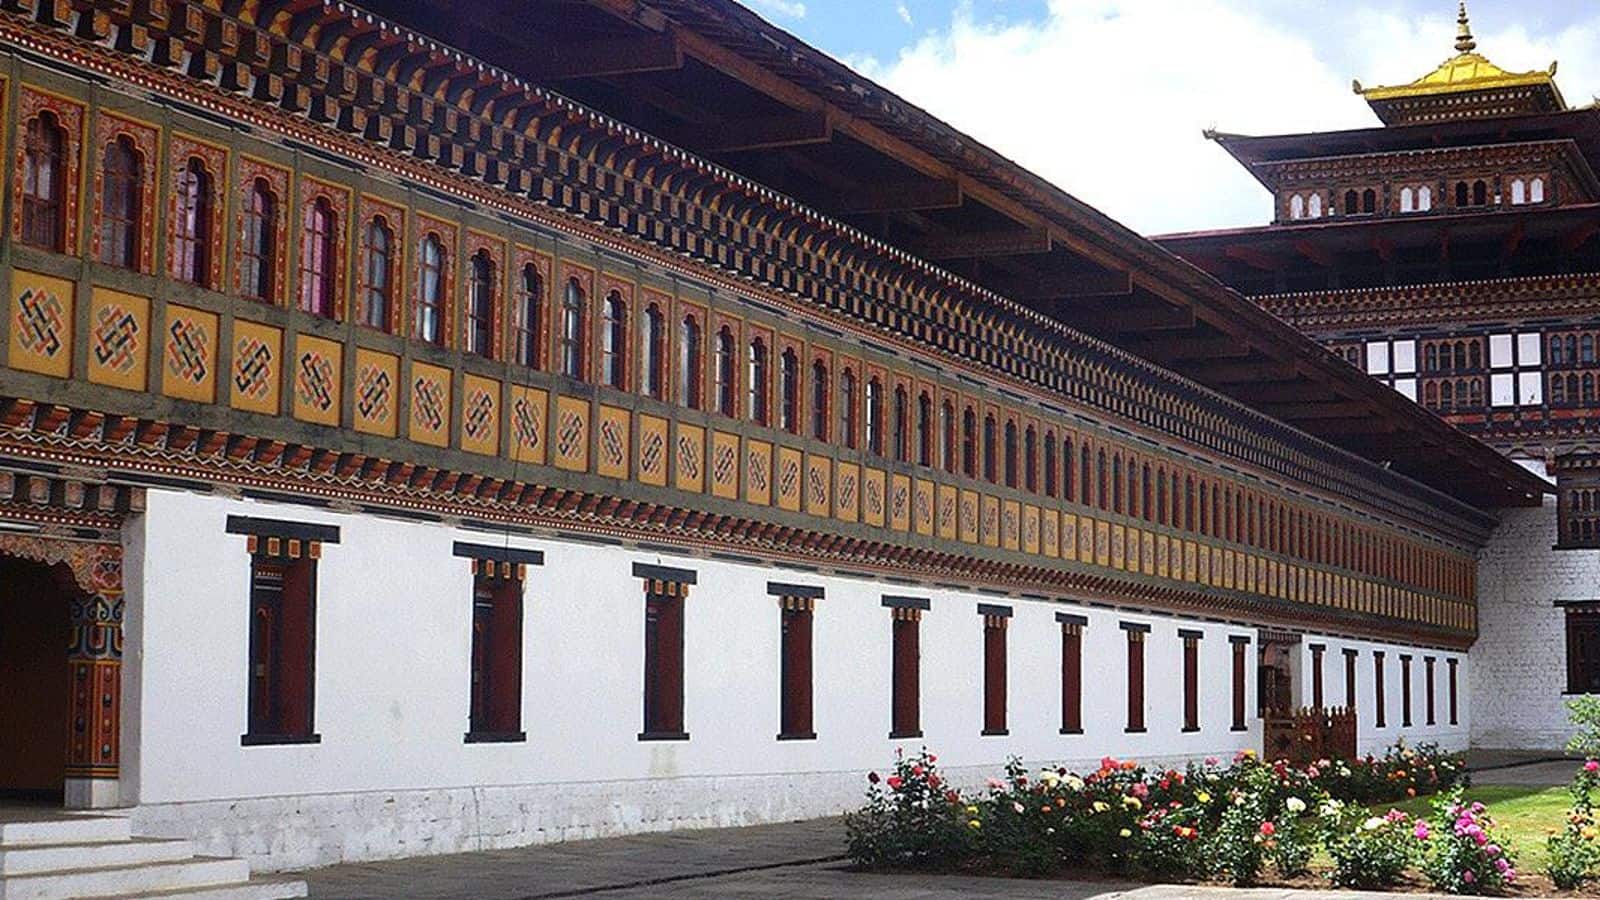 Head over to Bhutan's architectural marvels